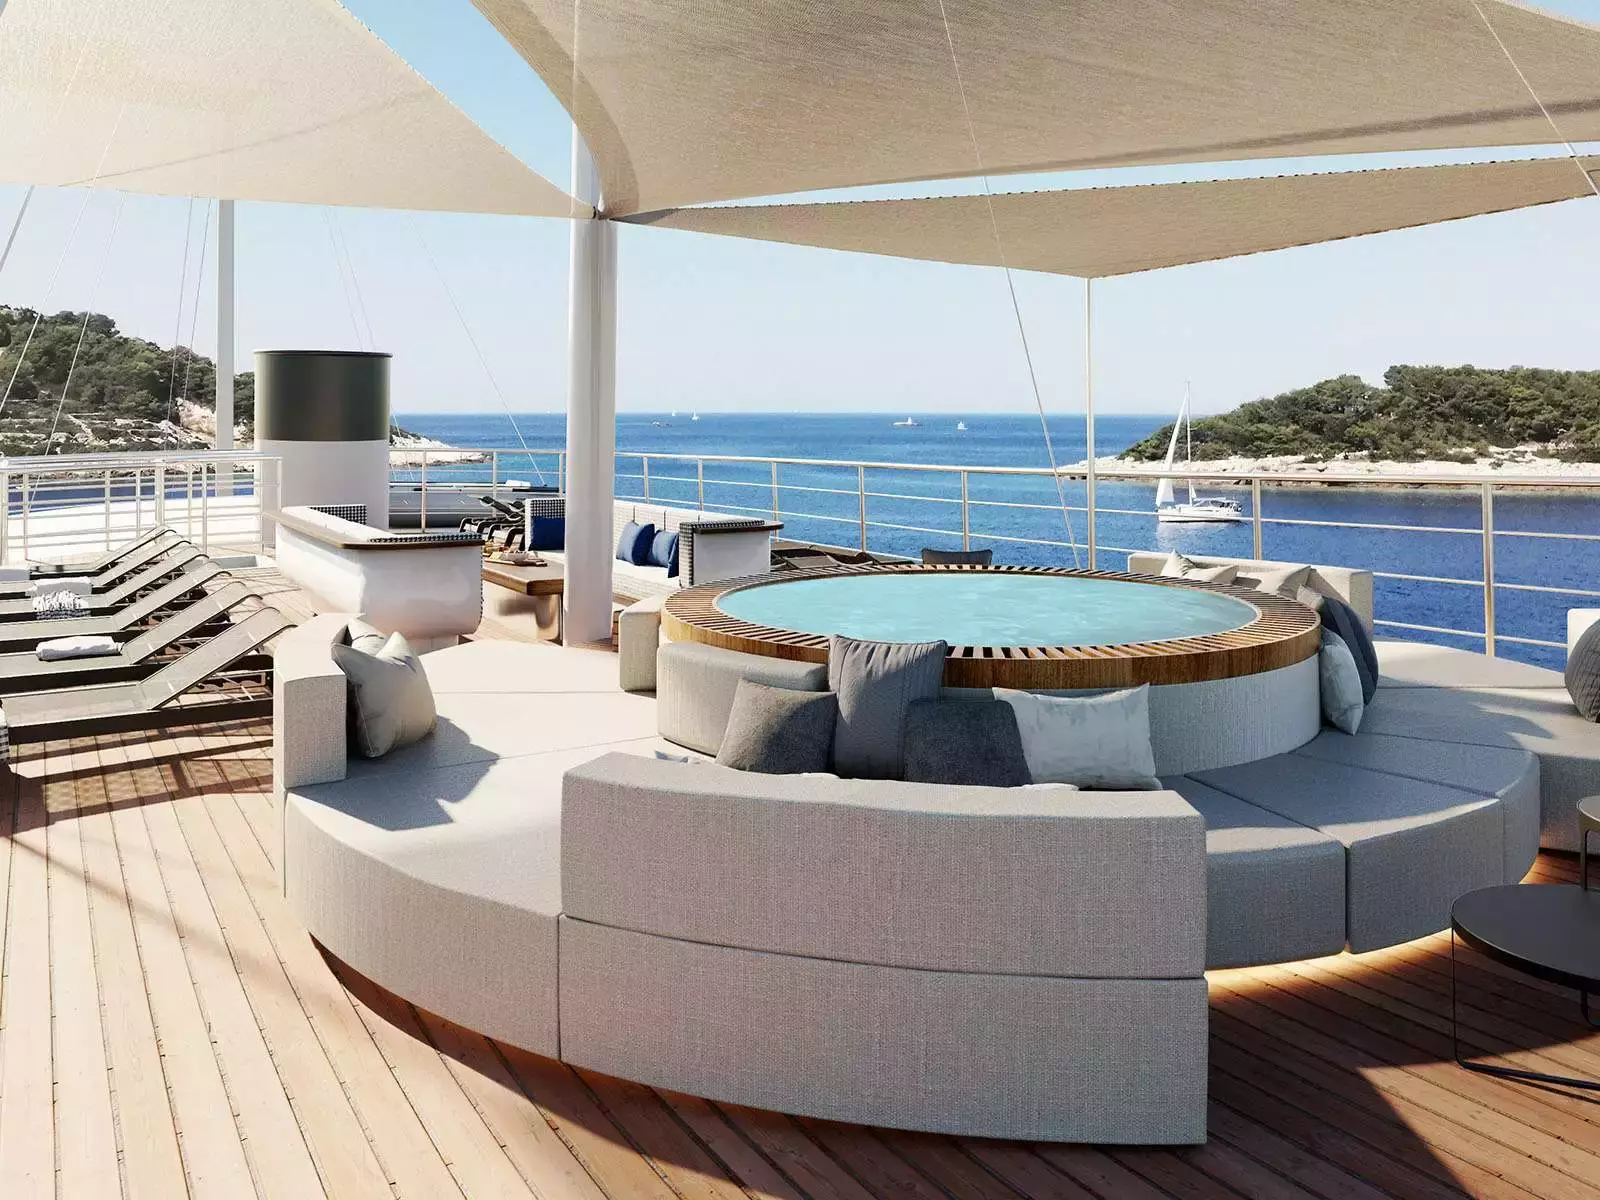 Bellezza by Custom Made - Special Offer for a private Superyacht Charter in Split with a crew